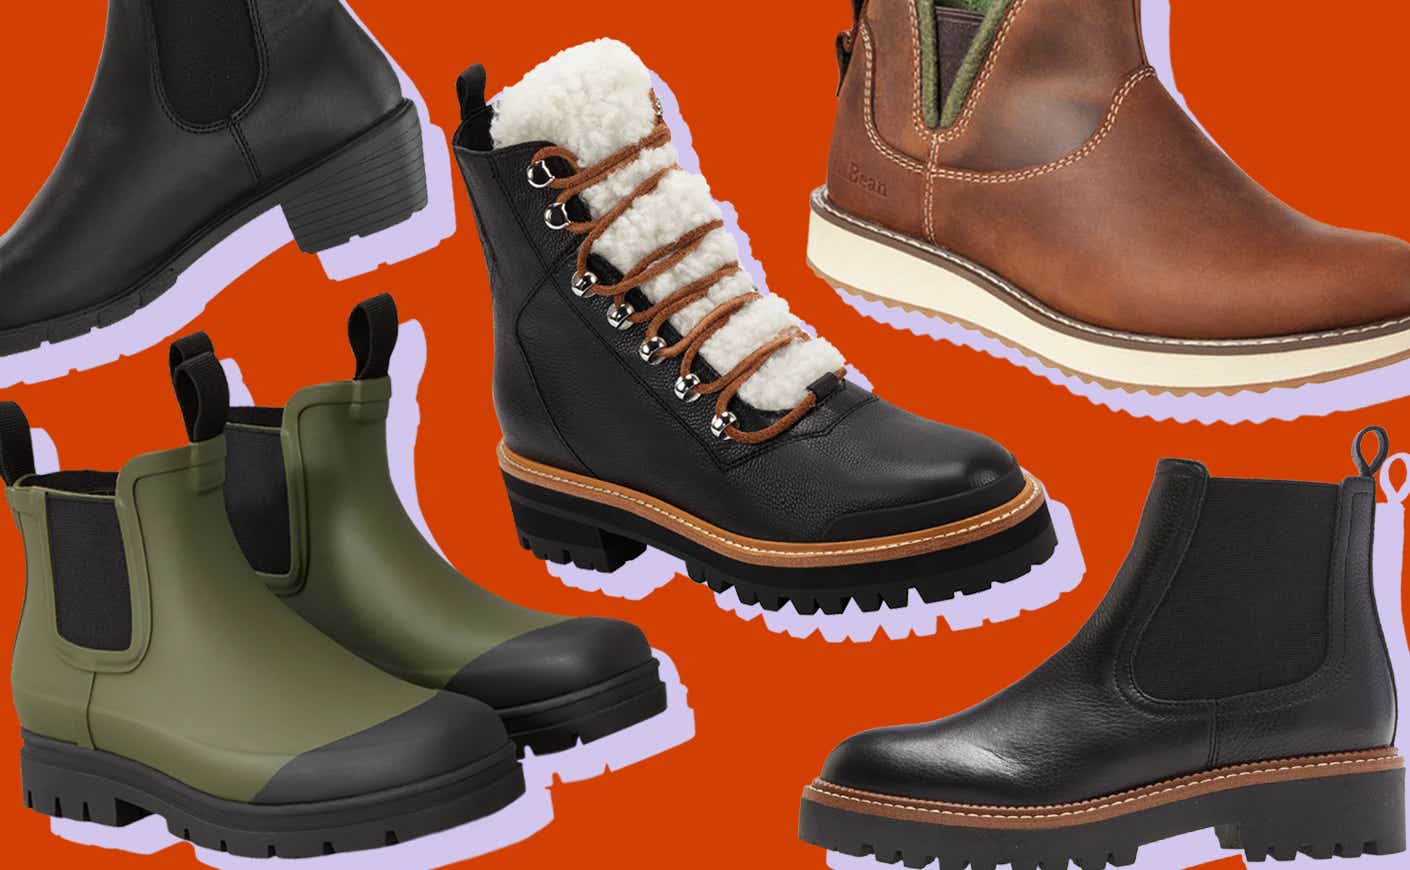 winter ankle boots on orange background